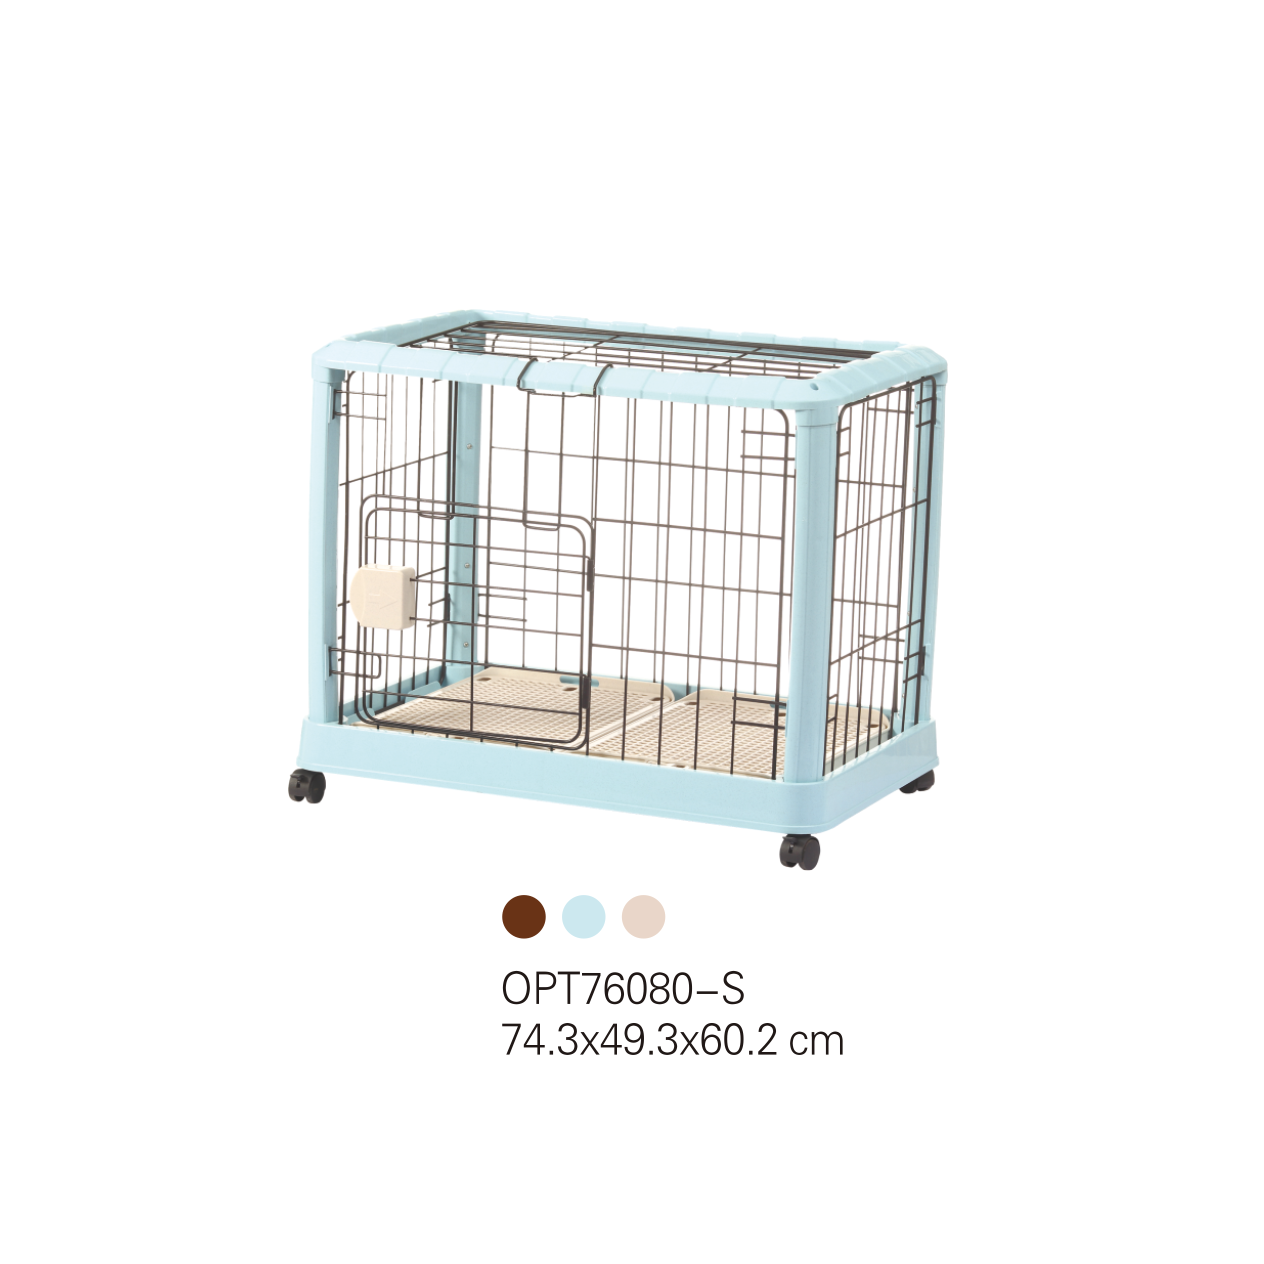 OPT76080 Pet cage